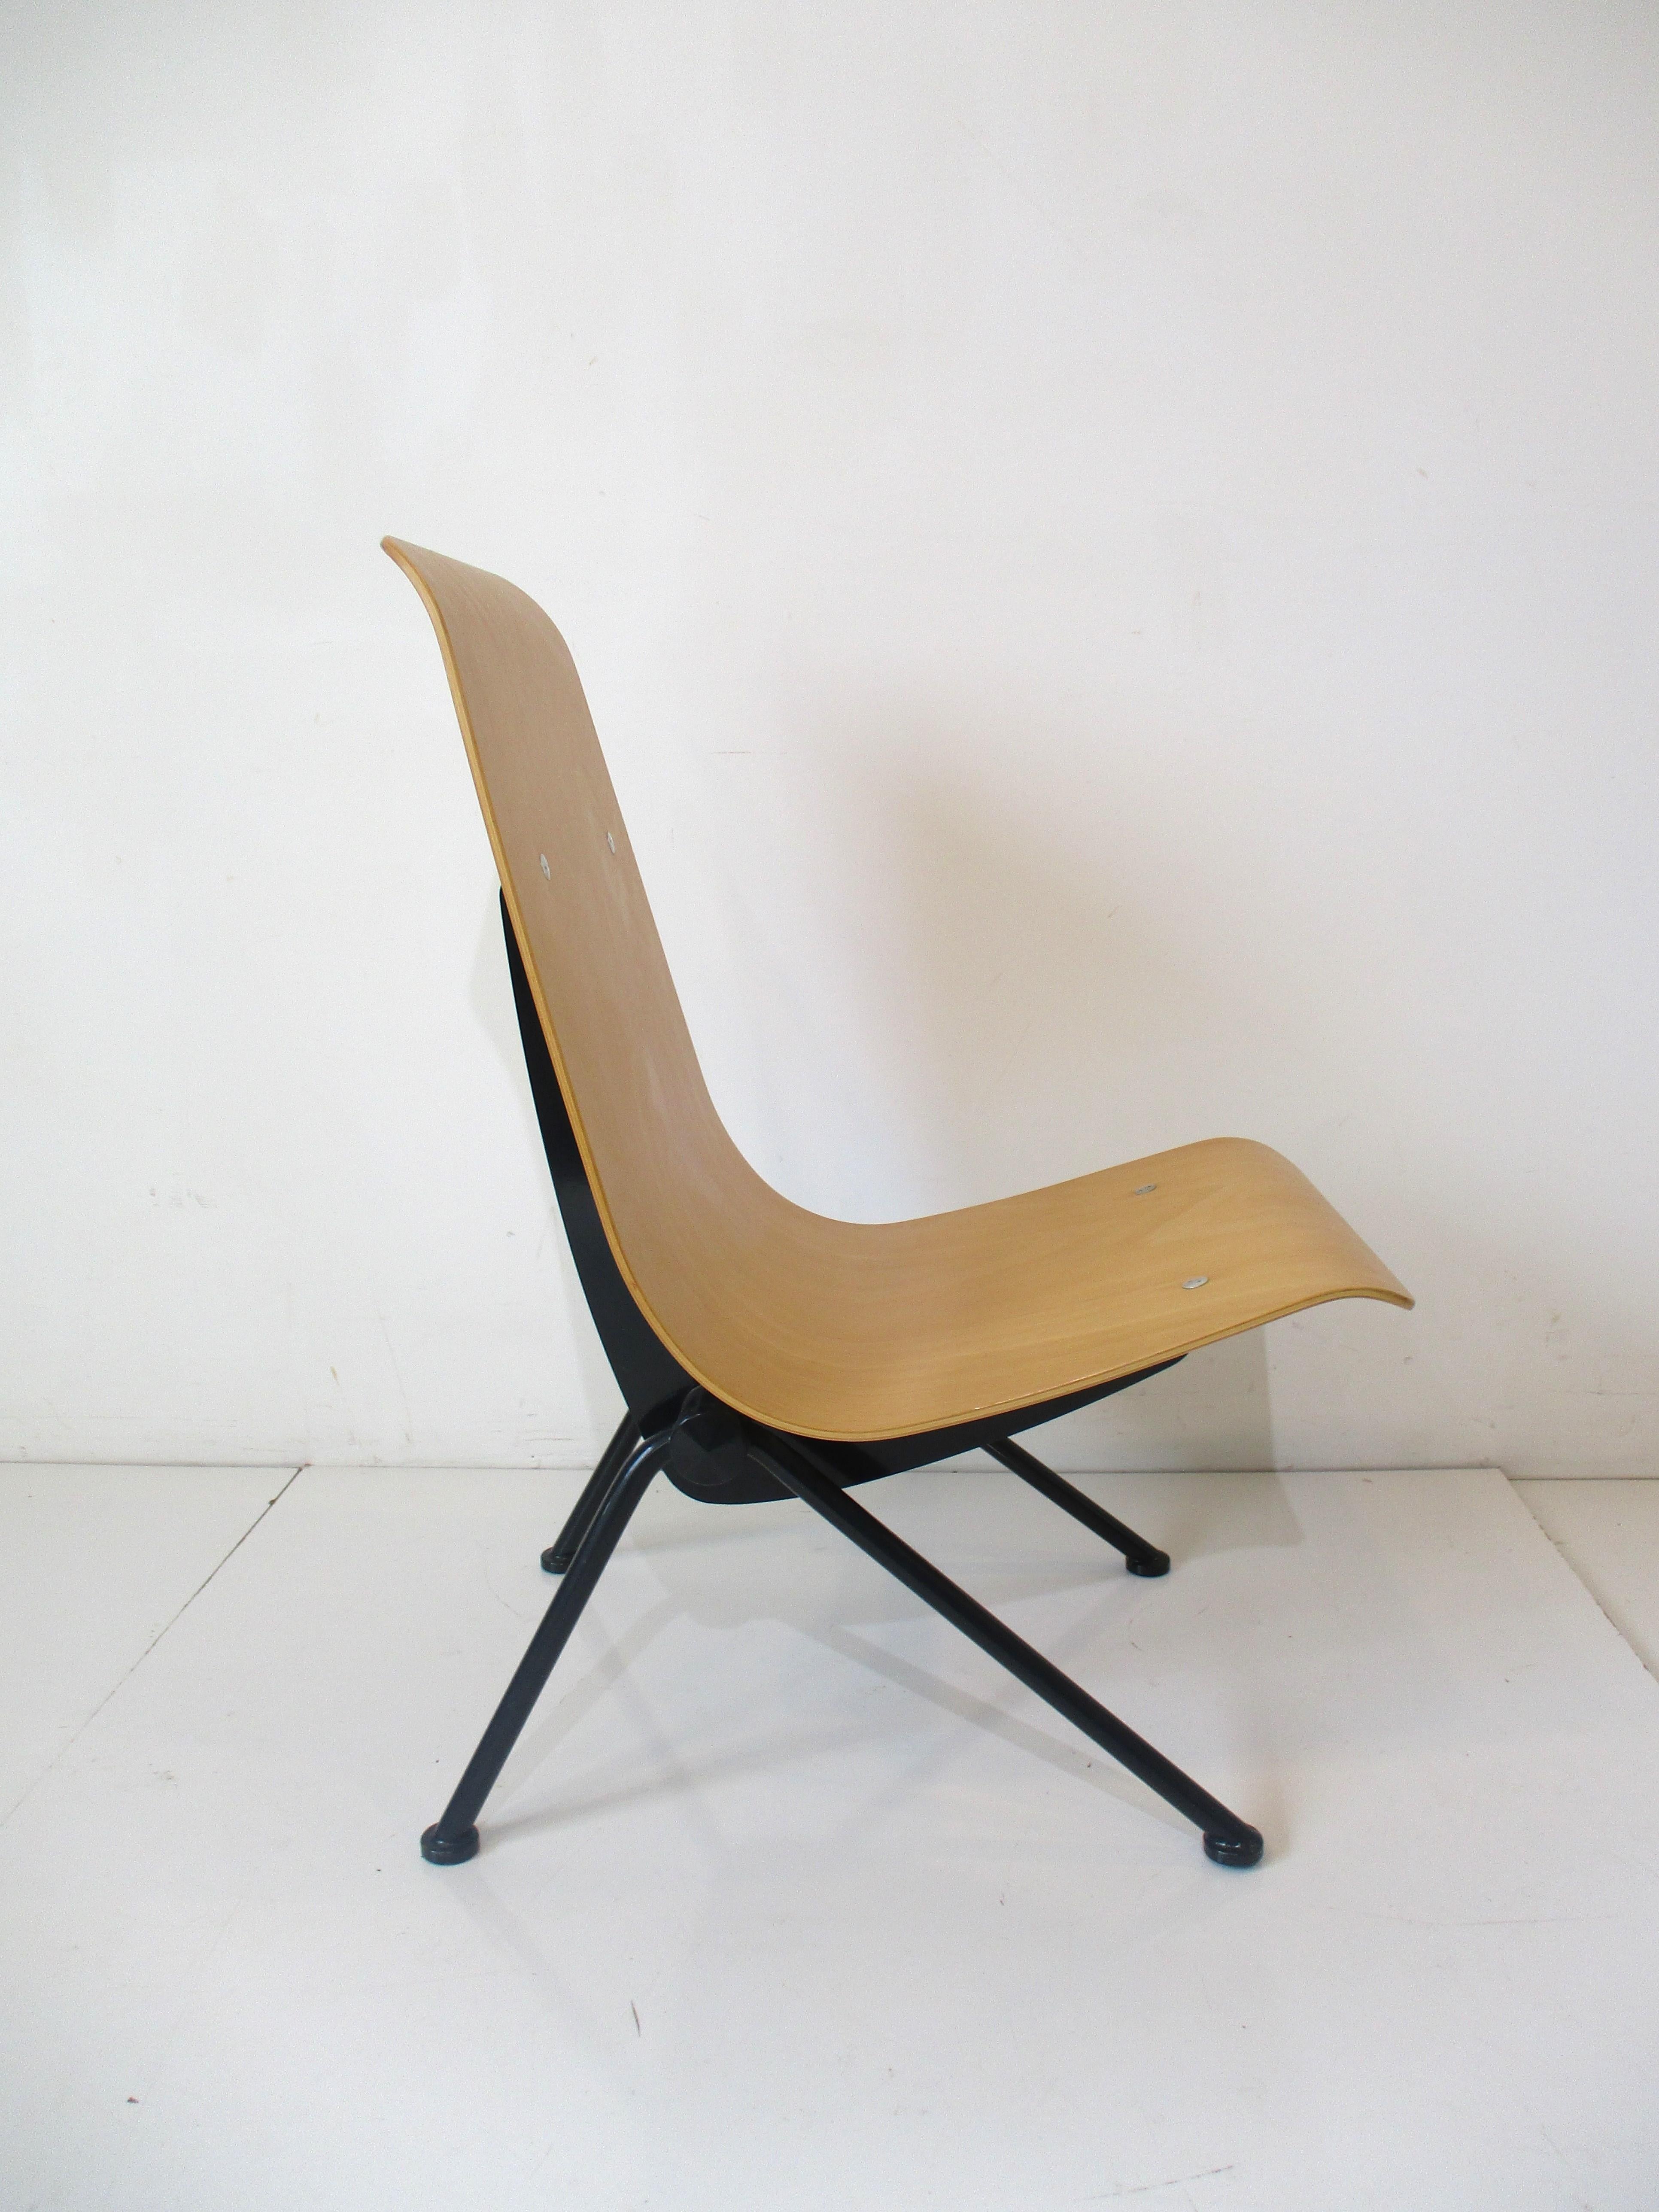 Mid-Century Modern Jean Prouve Antony Chair from the Limited Edition Vitra Collection